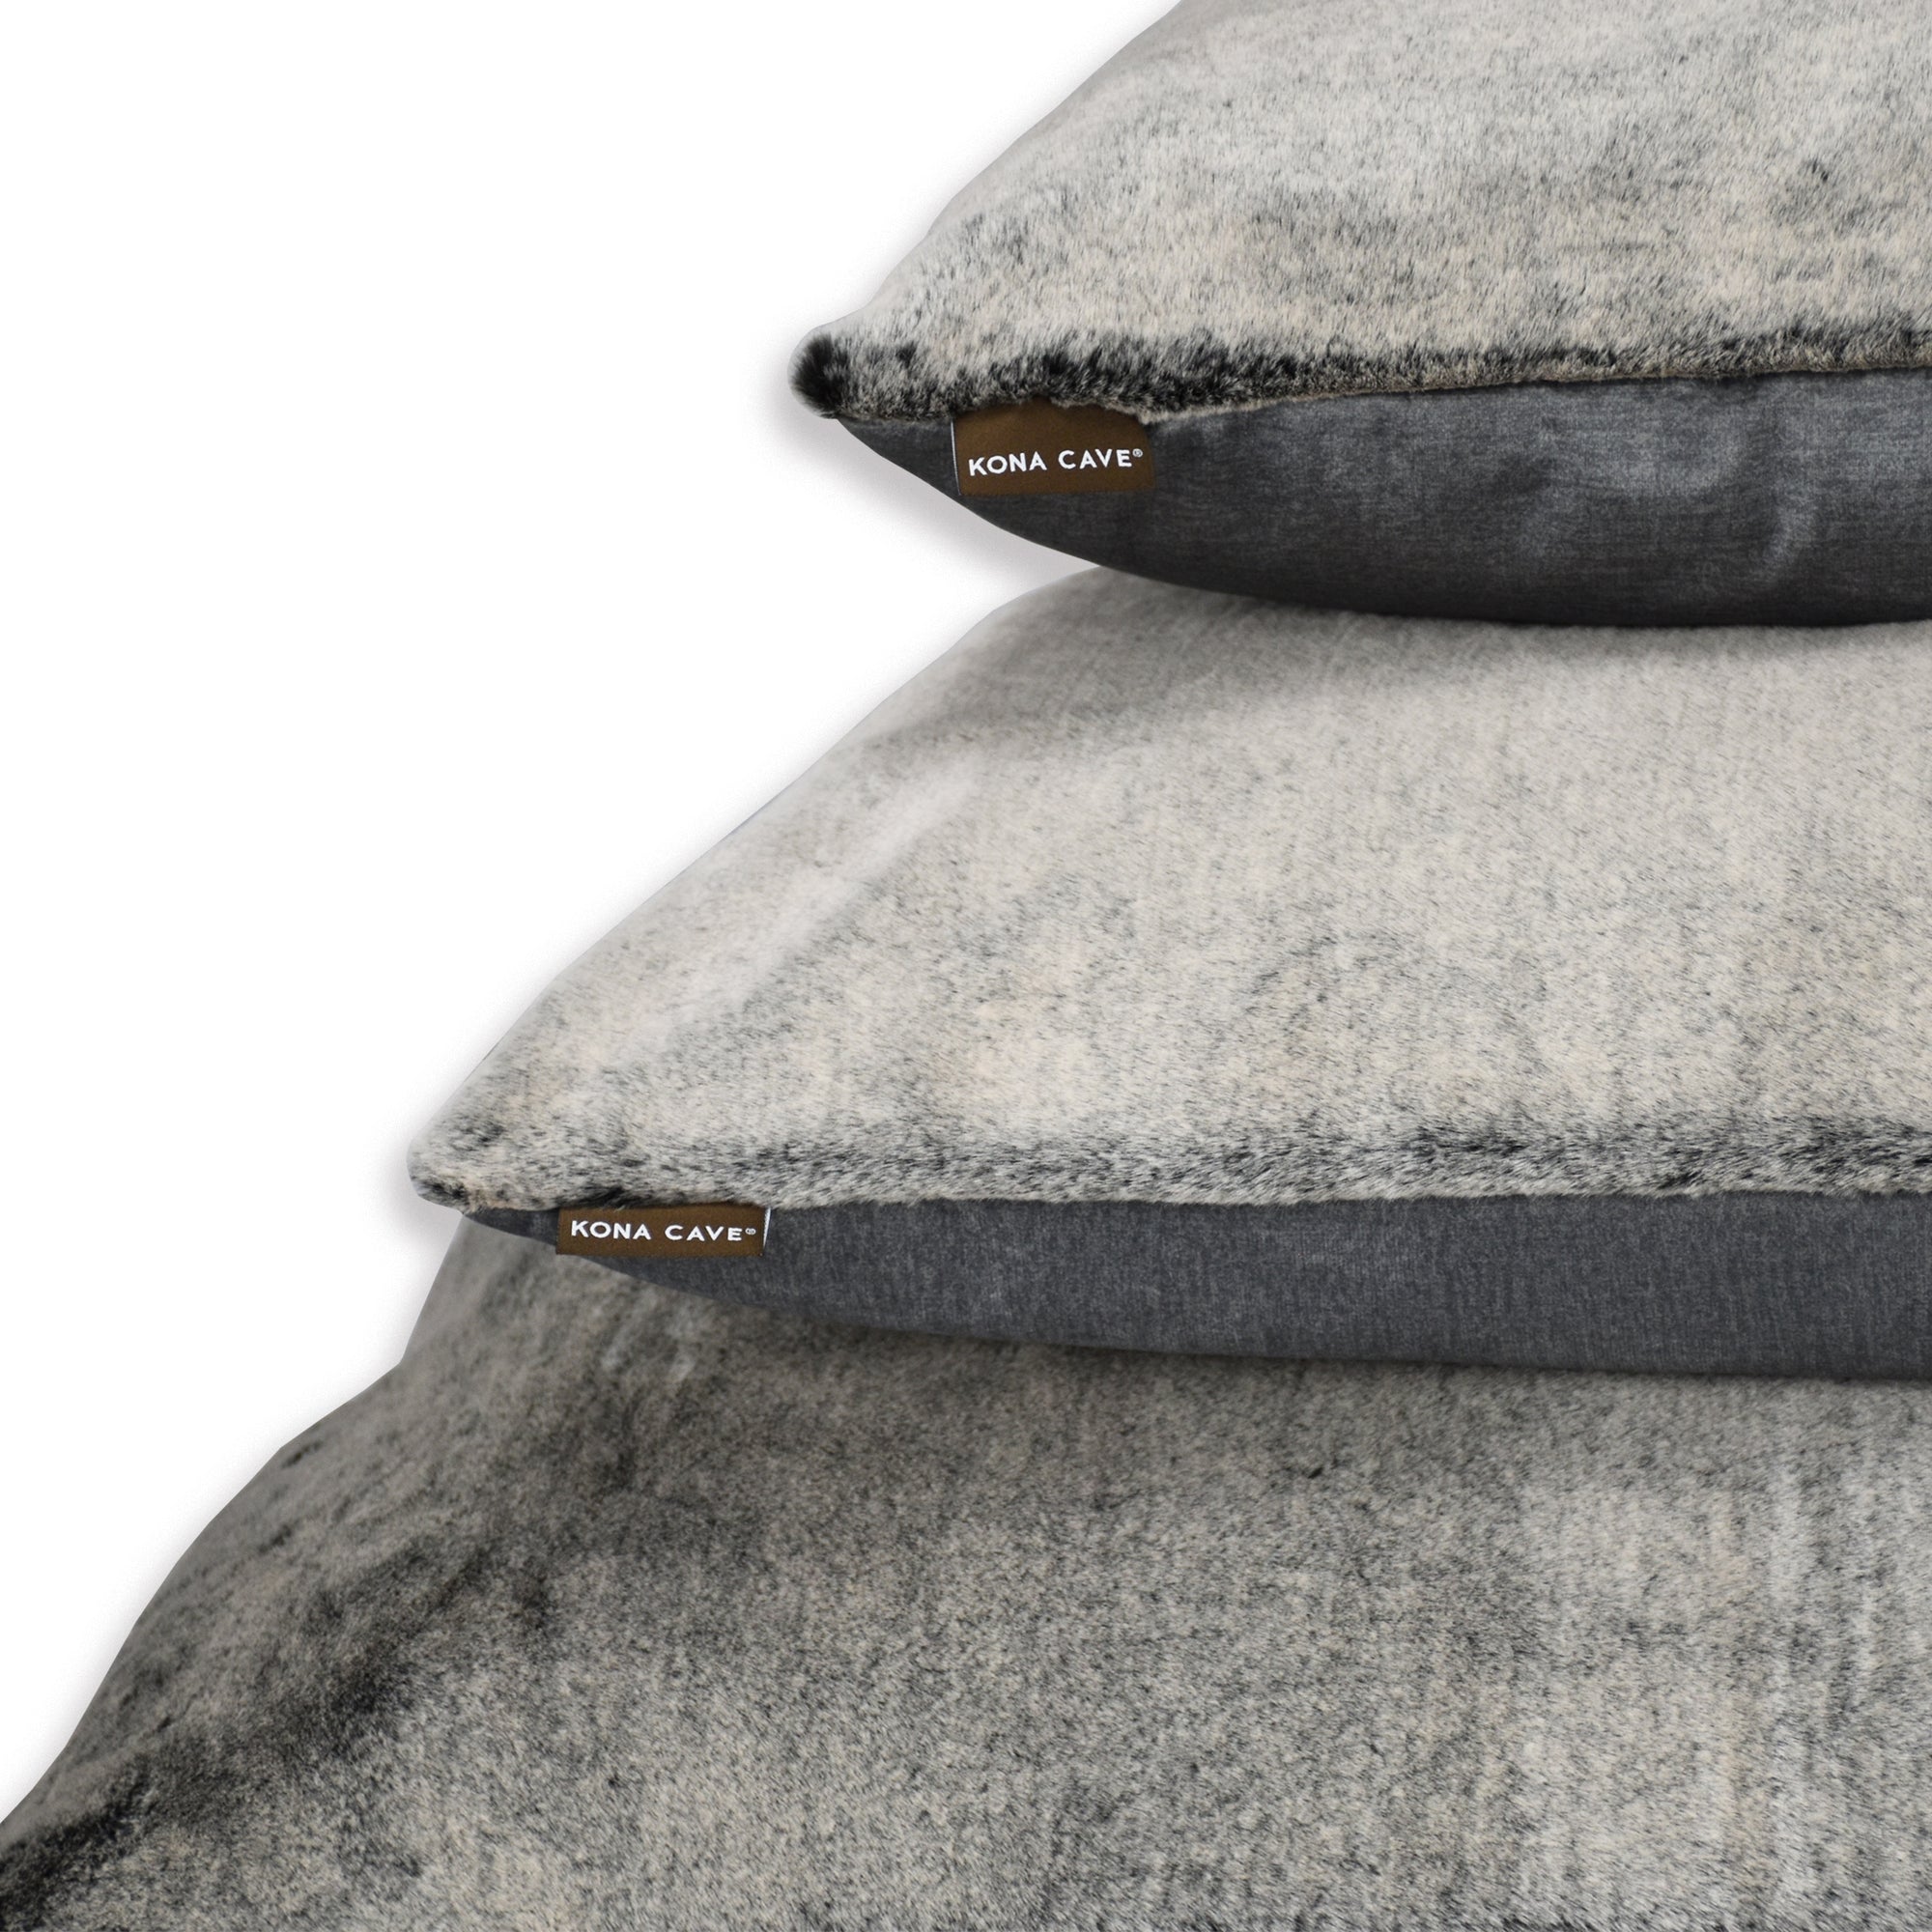 Dream Cushion - Faux Fur and Graphite Grey Velvet - With Optional Memory Foam Mattress